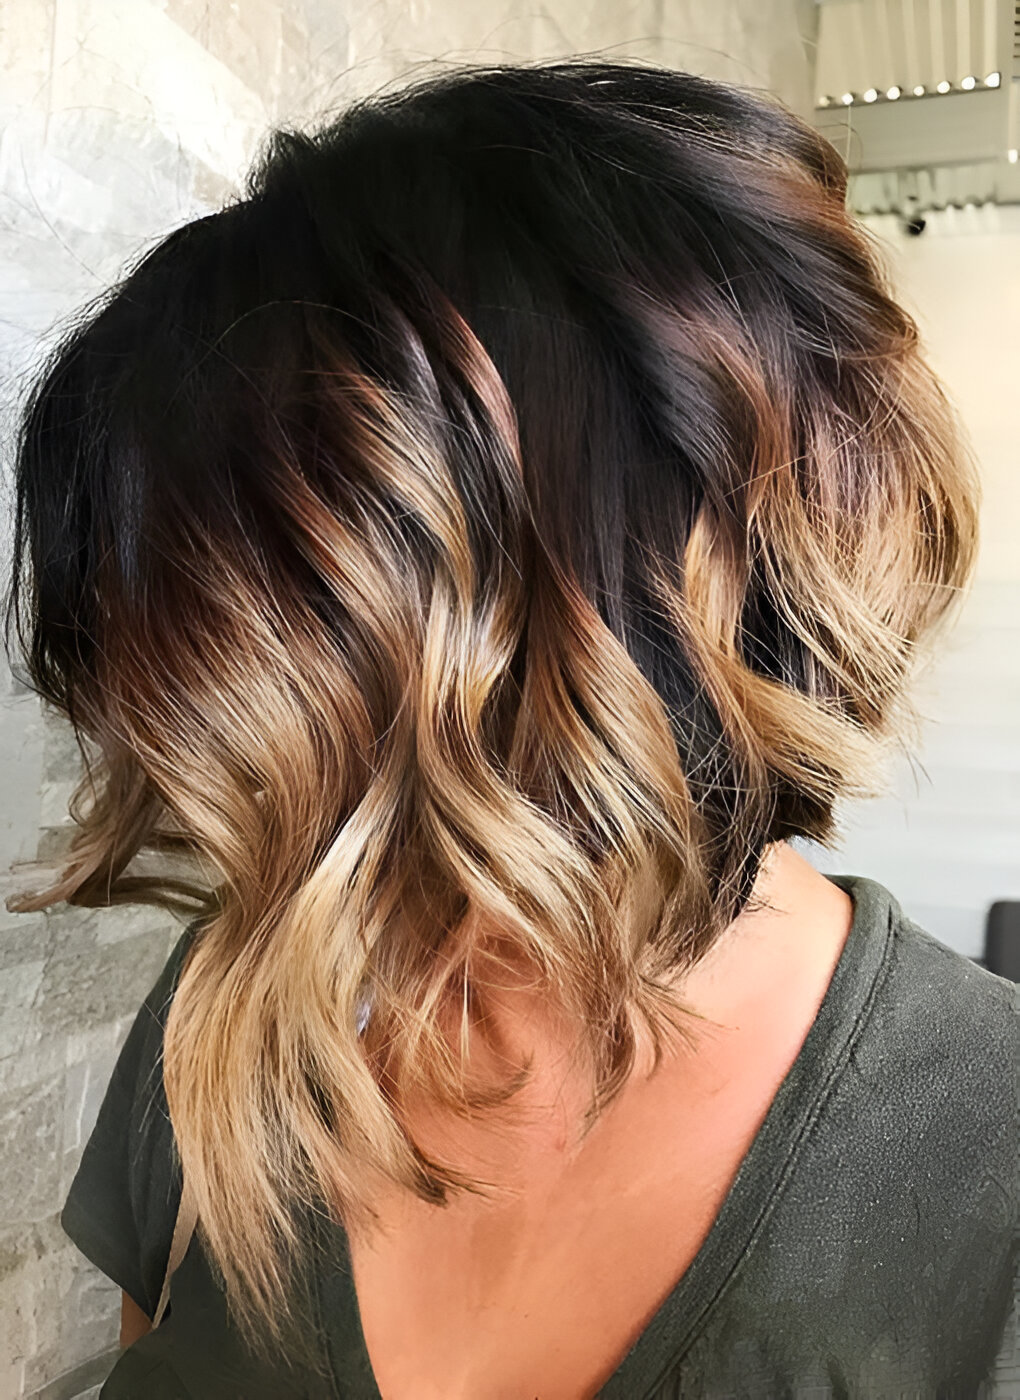 Stacked Bob Hairstyles With Balayage Highlight